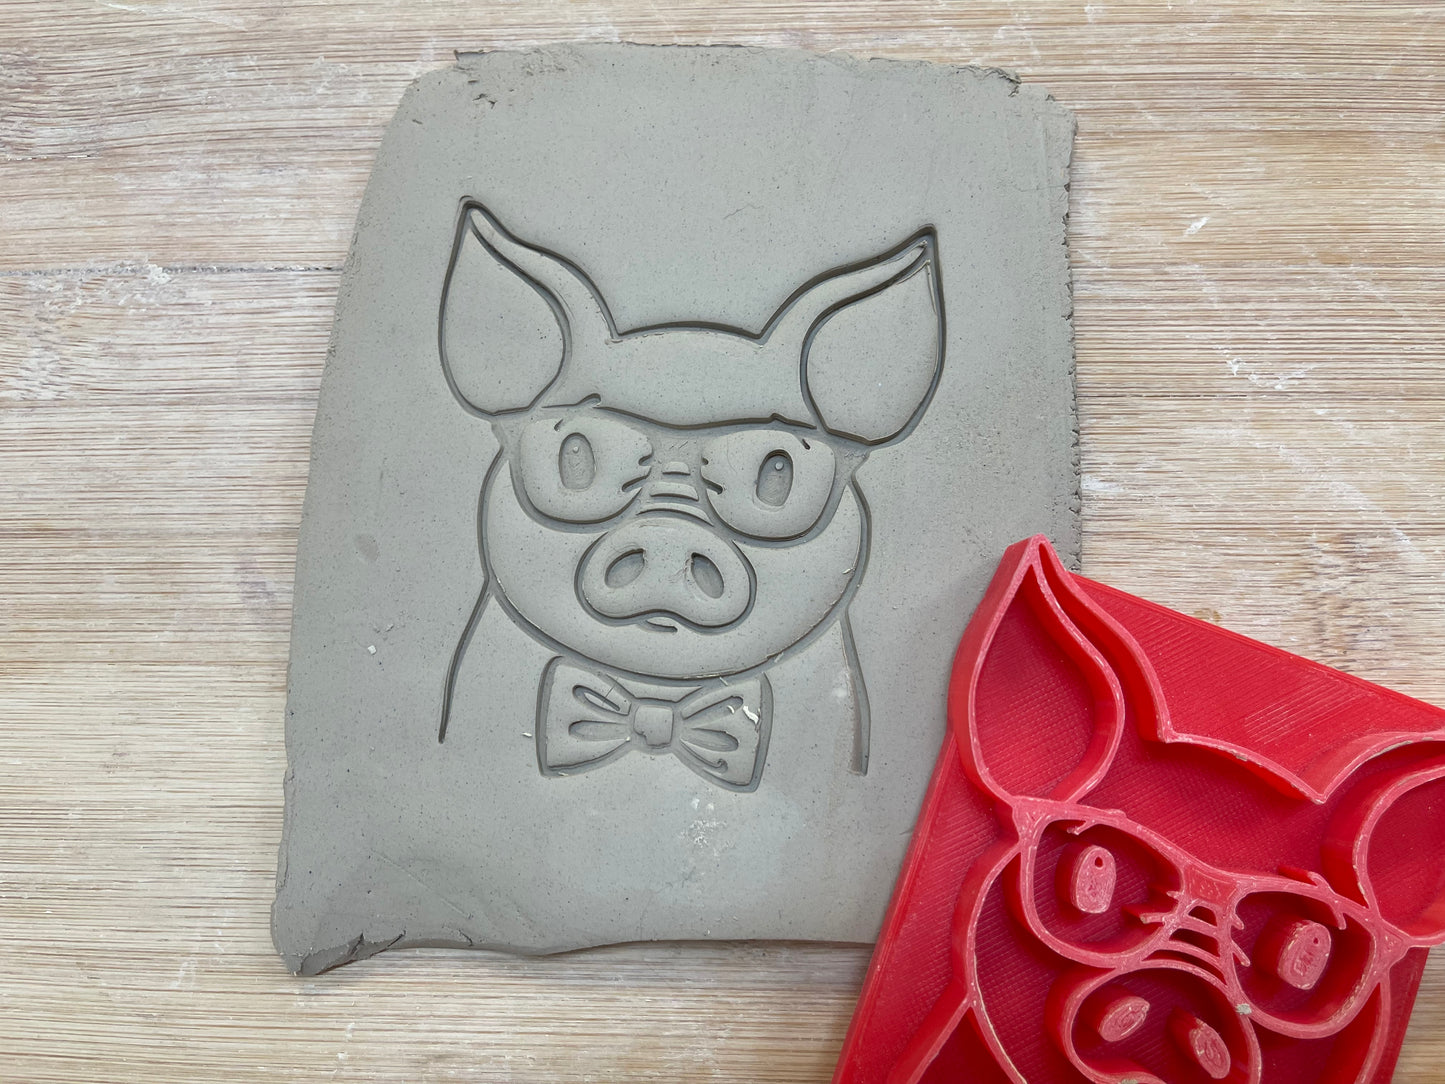 Pig Face w/ Bowtie and Glasses Pottery Stamp - Pottery Tool, plastic 3d printed, multiple sizes available